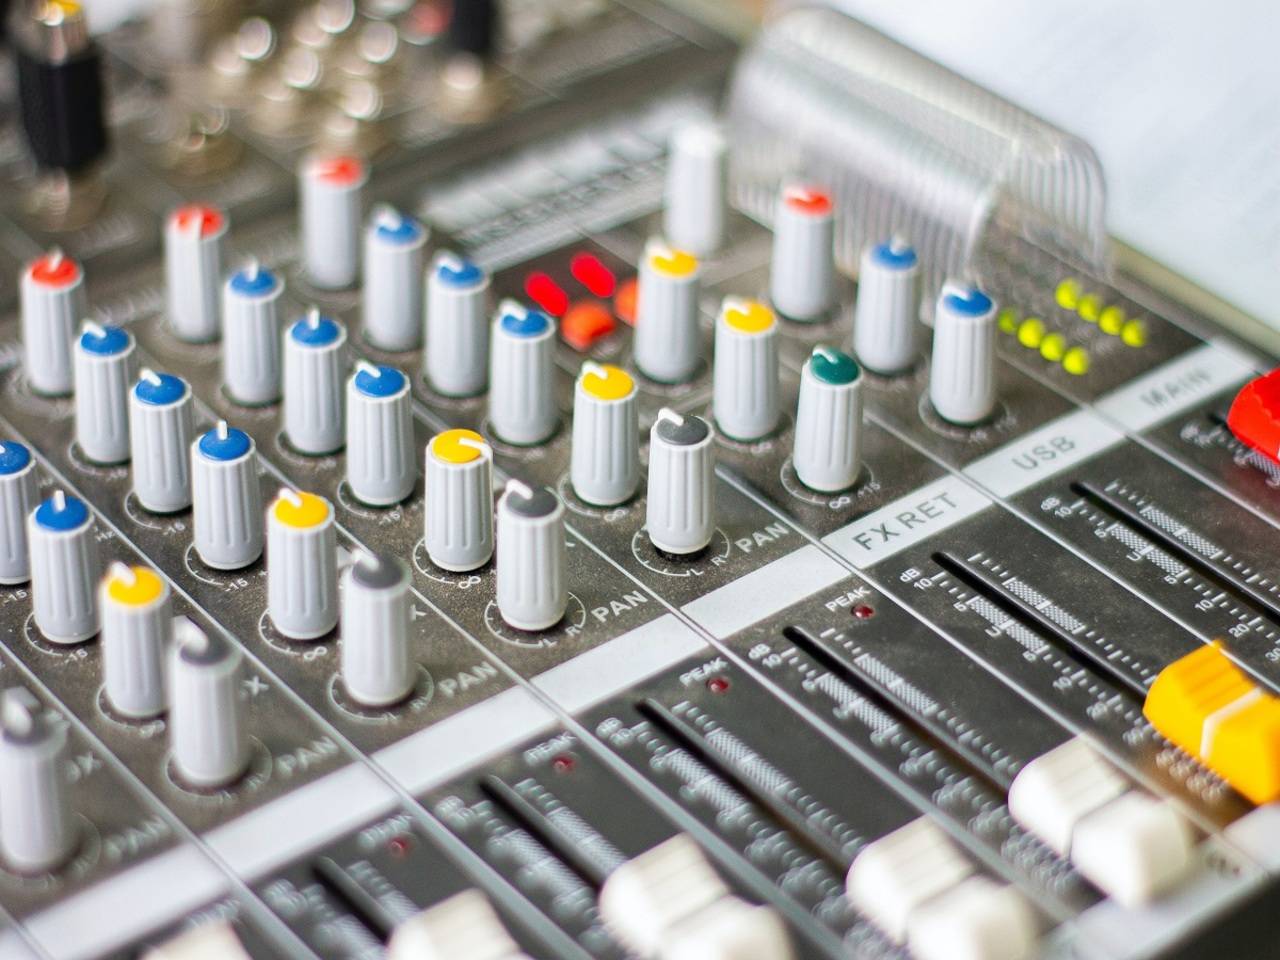 Audio mixers to help you mix sounds level - Times of India